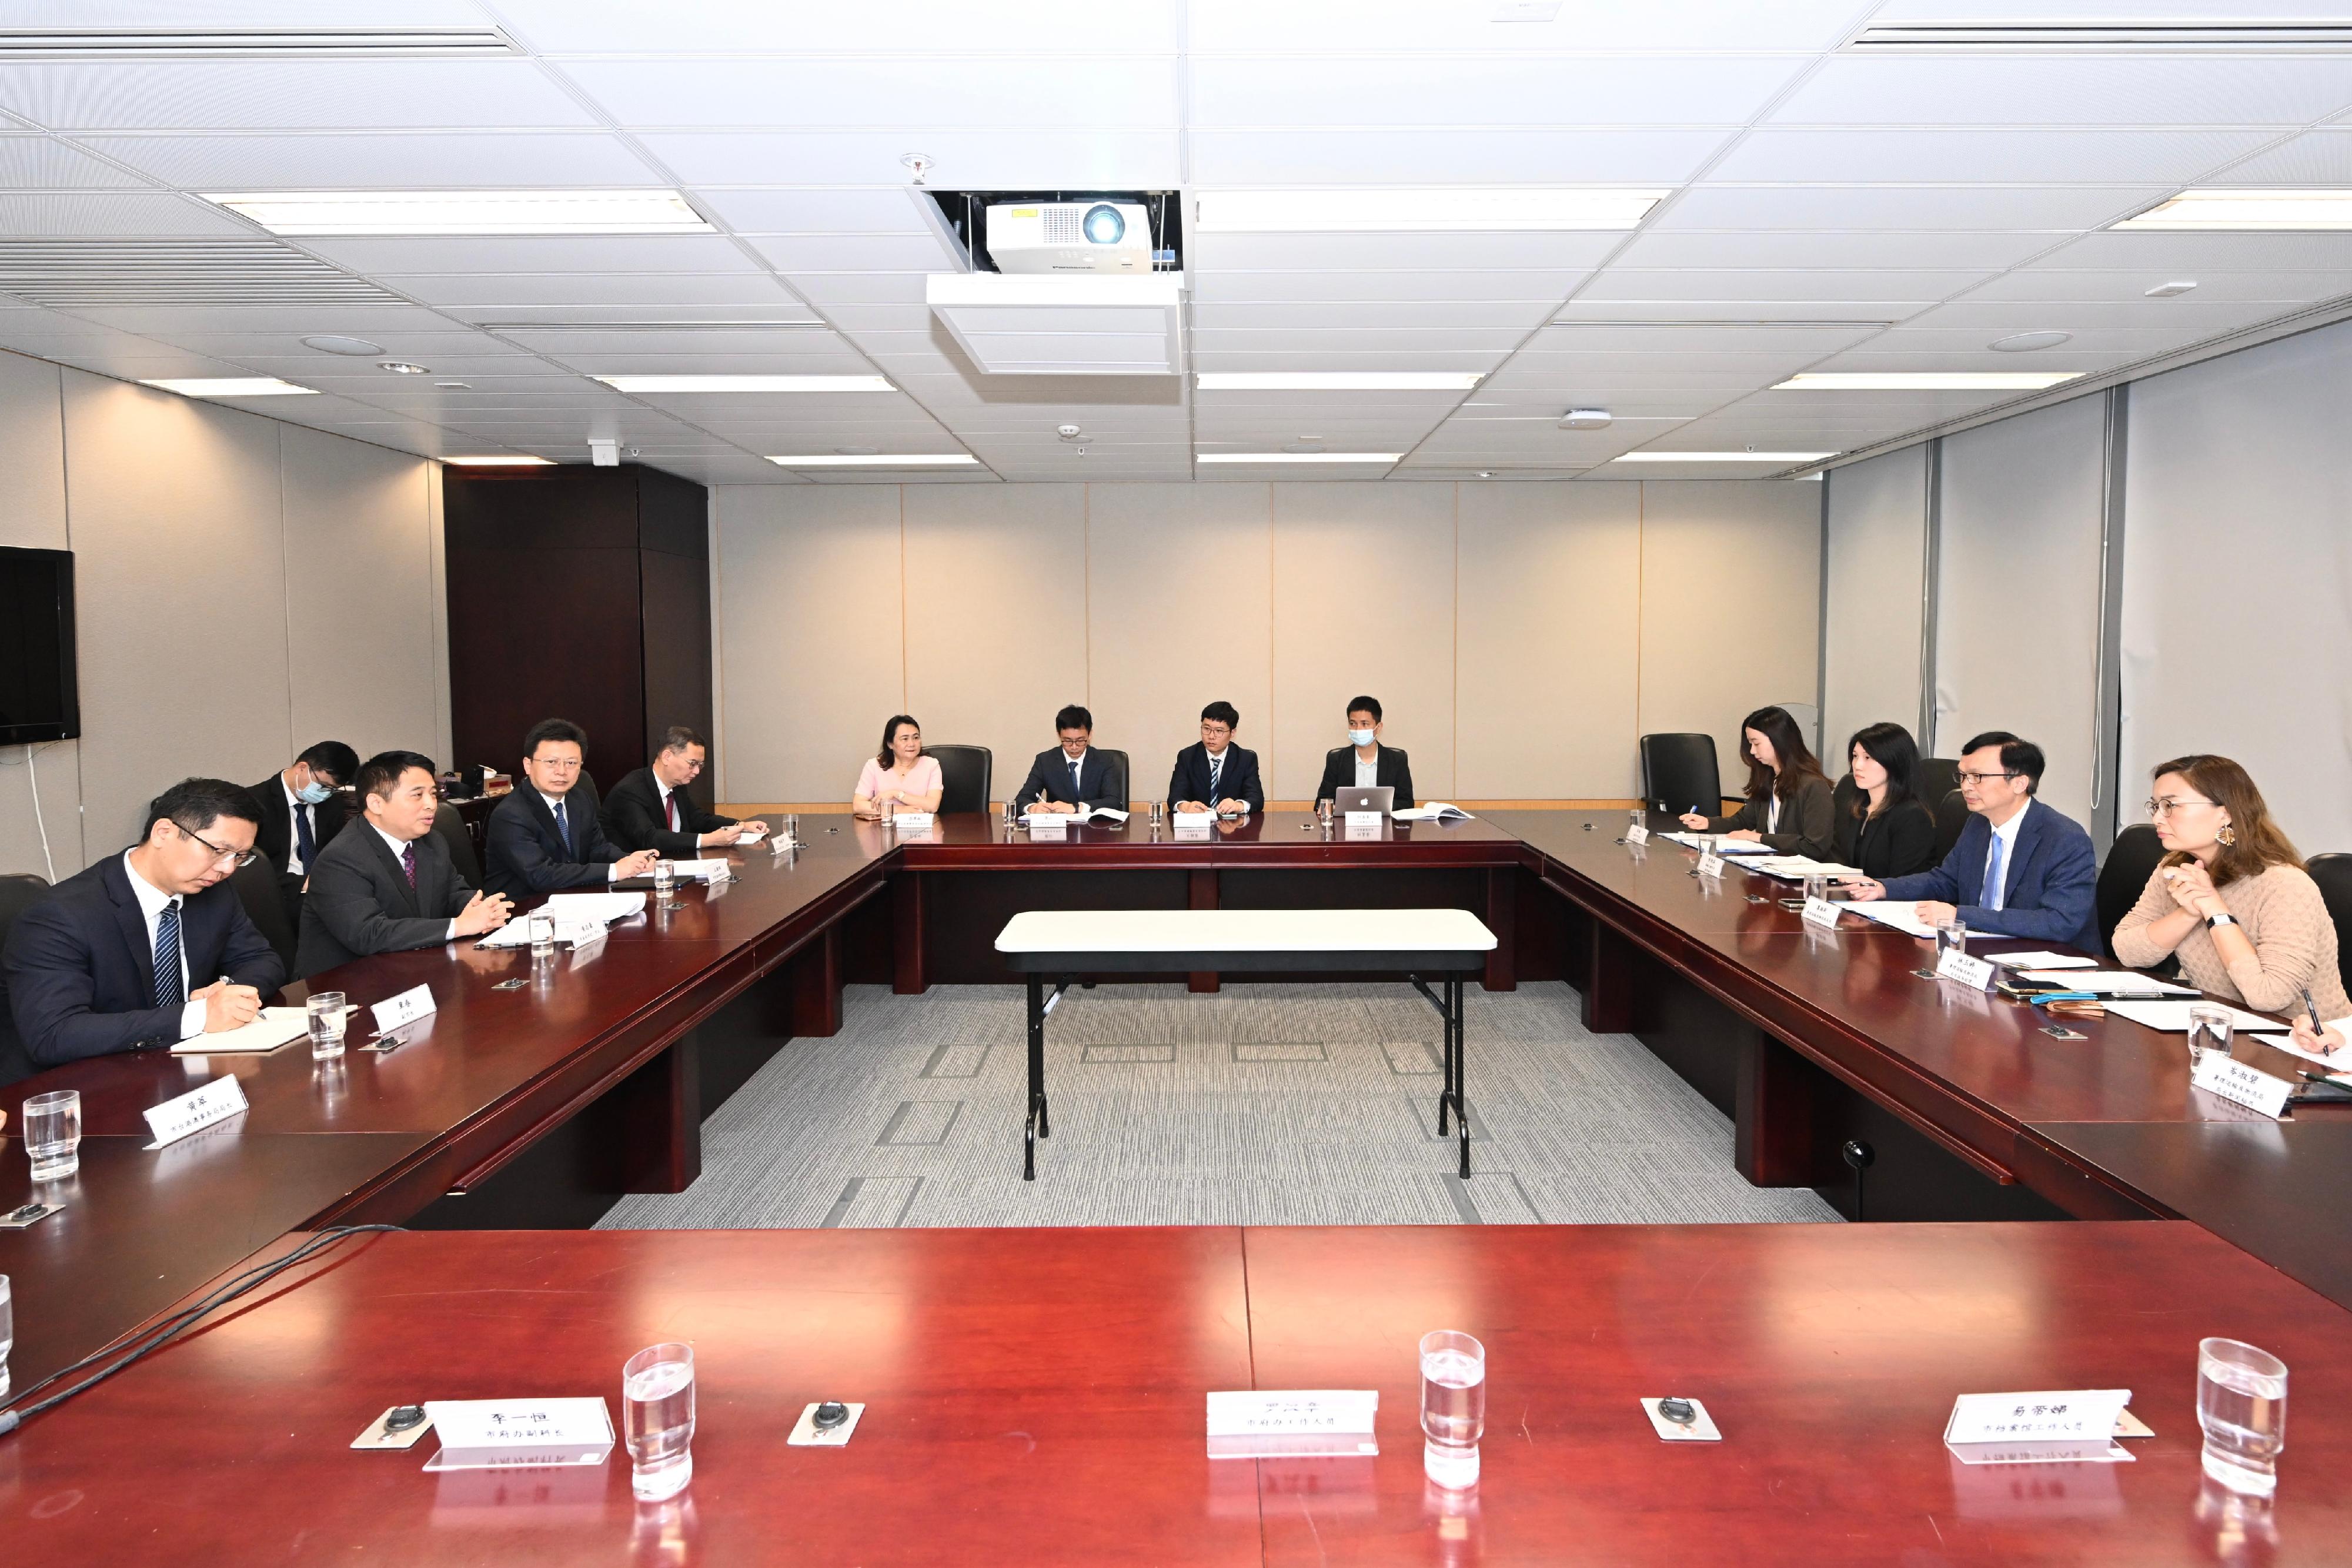 The Acting Secretary for Transport and Logistics, Mr Liu Chun-san, met the Mayor of the Zhuhai Municipal Government, Mr Huang Zhihao, today (May 19). Photo shows the Transport and Logistics Bureau exchanging views with the delegation of the Zhuhai Municipal Government on deepening co-operation on logistics and aviation. 